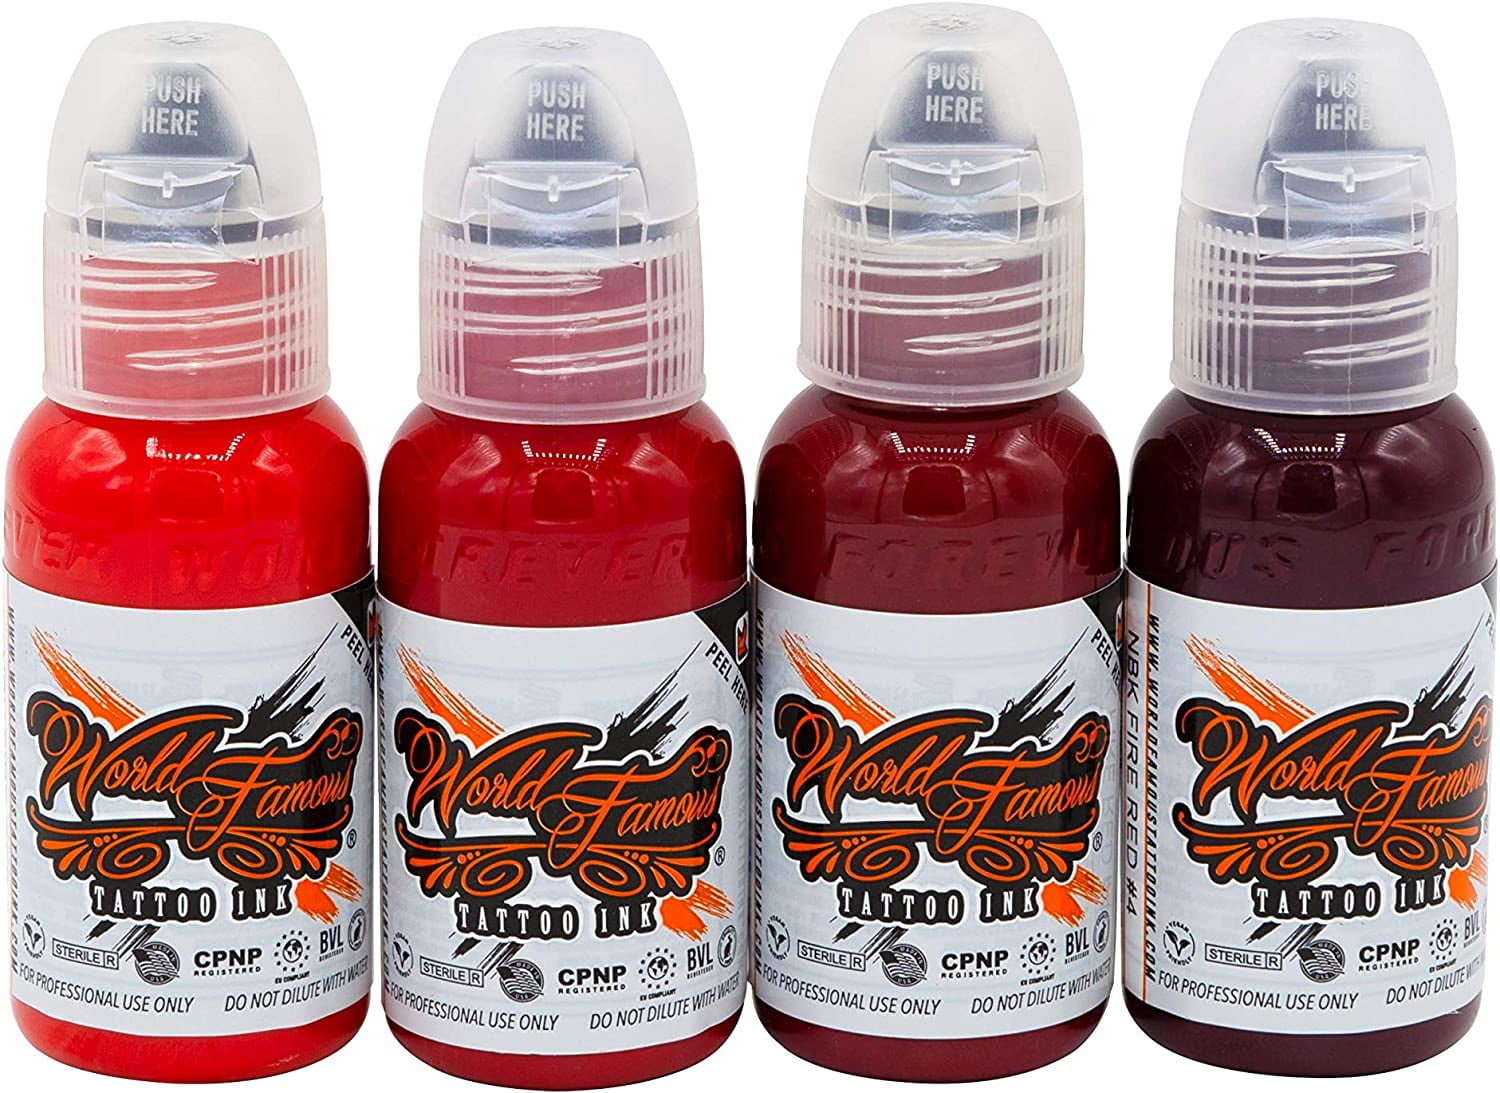 World Famous Red Set Tattoo Ink, Vegan and Professional Ink, Made in USA,  NBK Fire Red Set , 1oz 